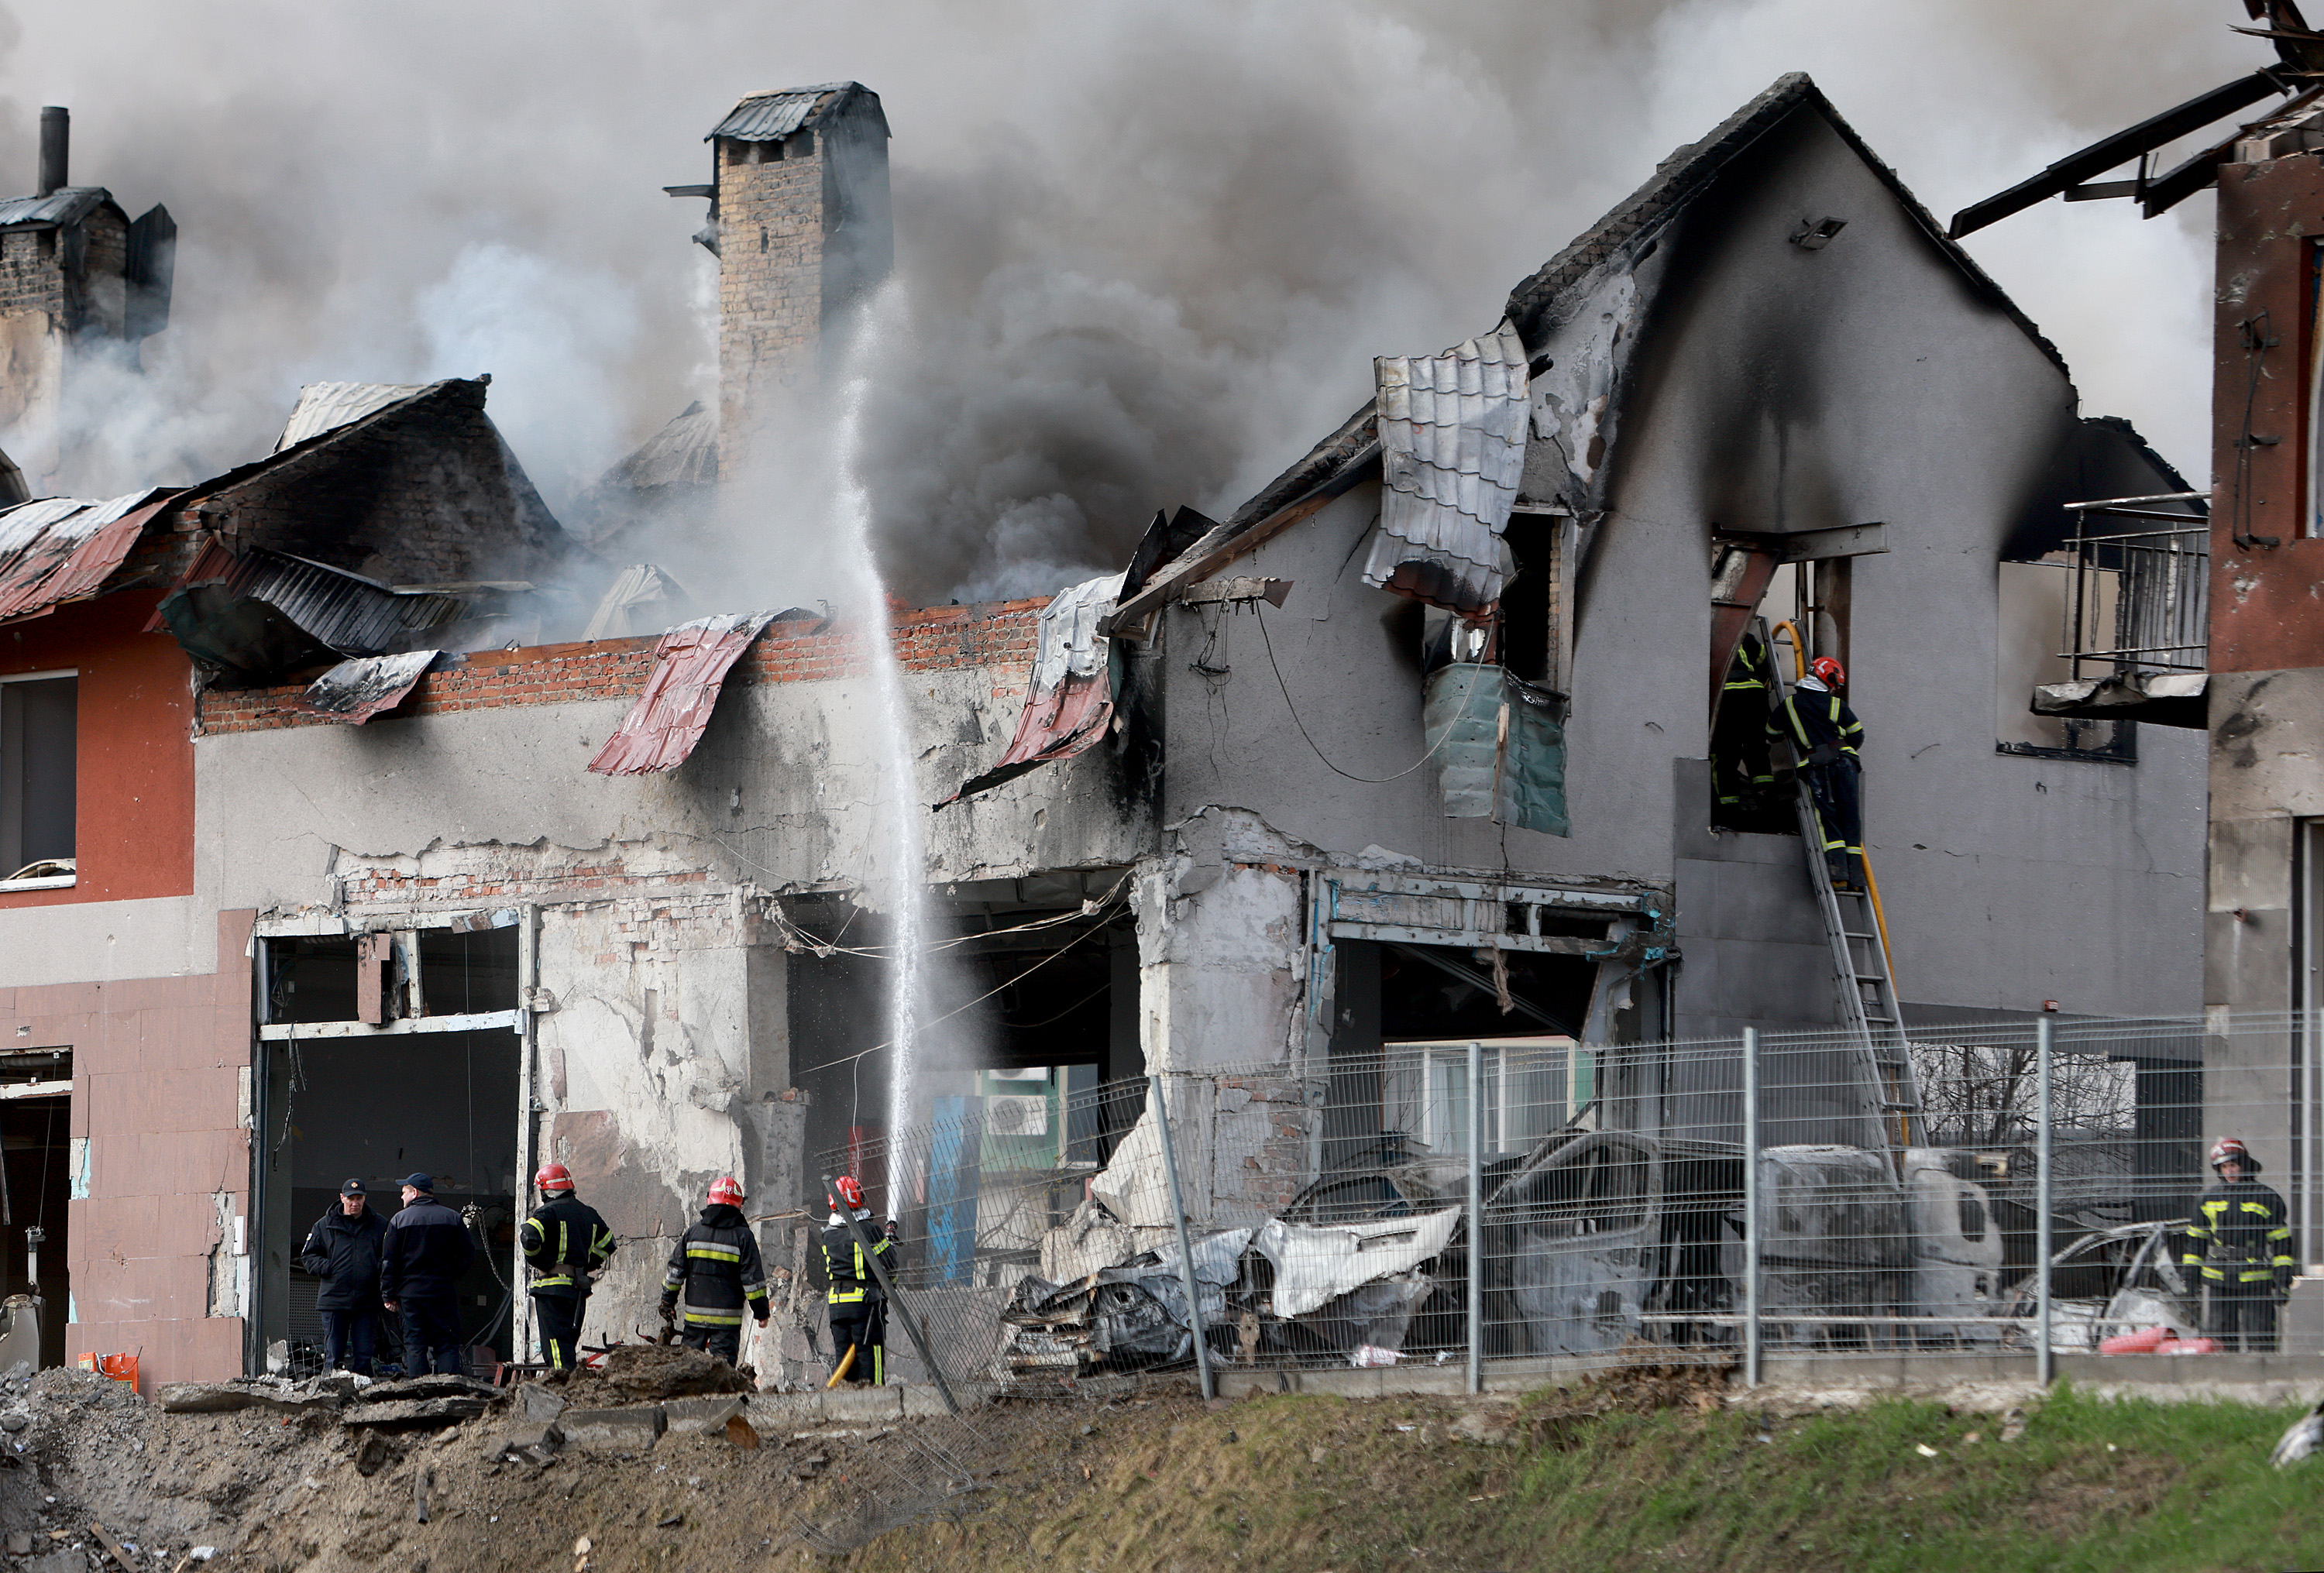 Firefighters battle a blaze after a civilian building was hit by a Russian missile on April 18, in Lviv, Ukraine.